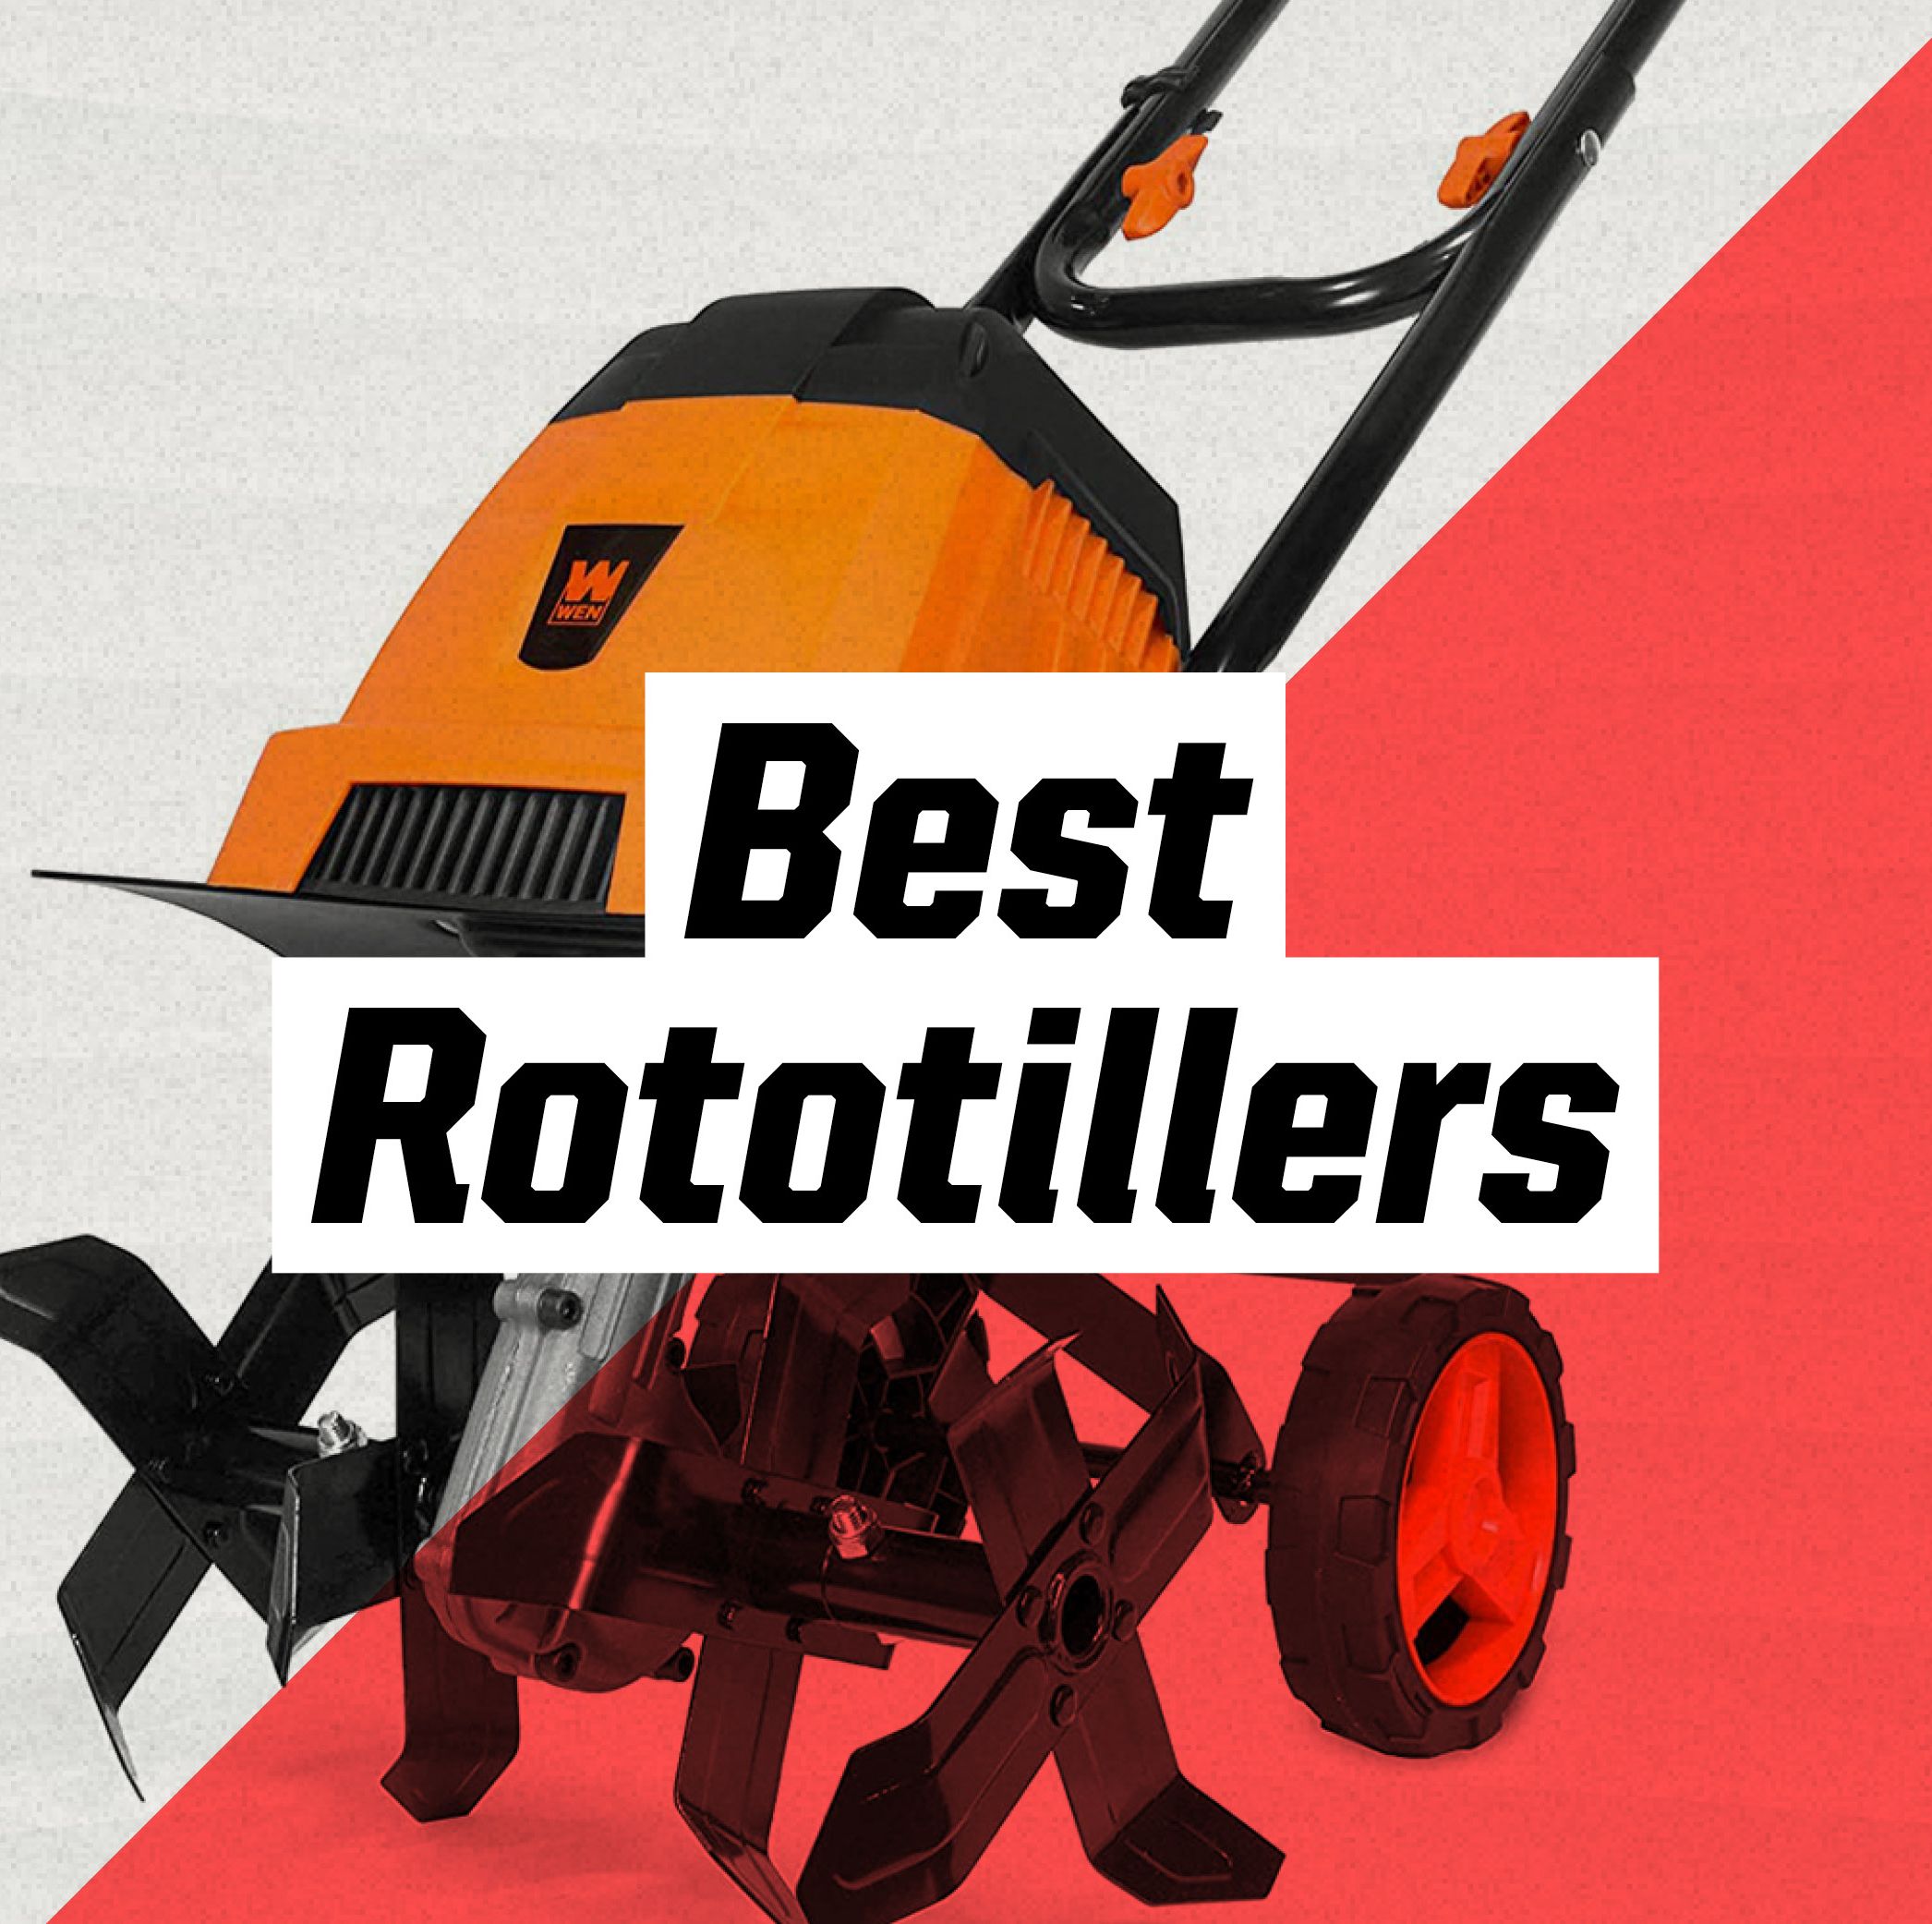 The Best Rototillers for Turning Hard-Packed Dirt into Nutrient-Rich Soil